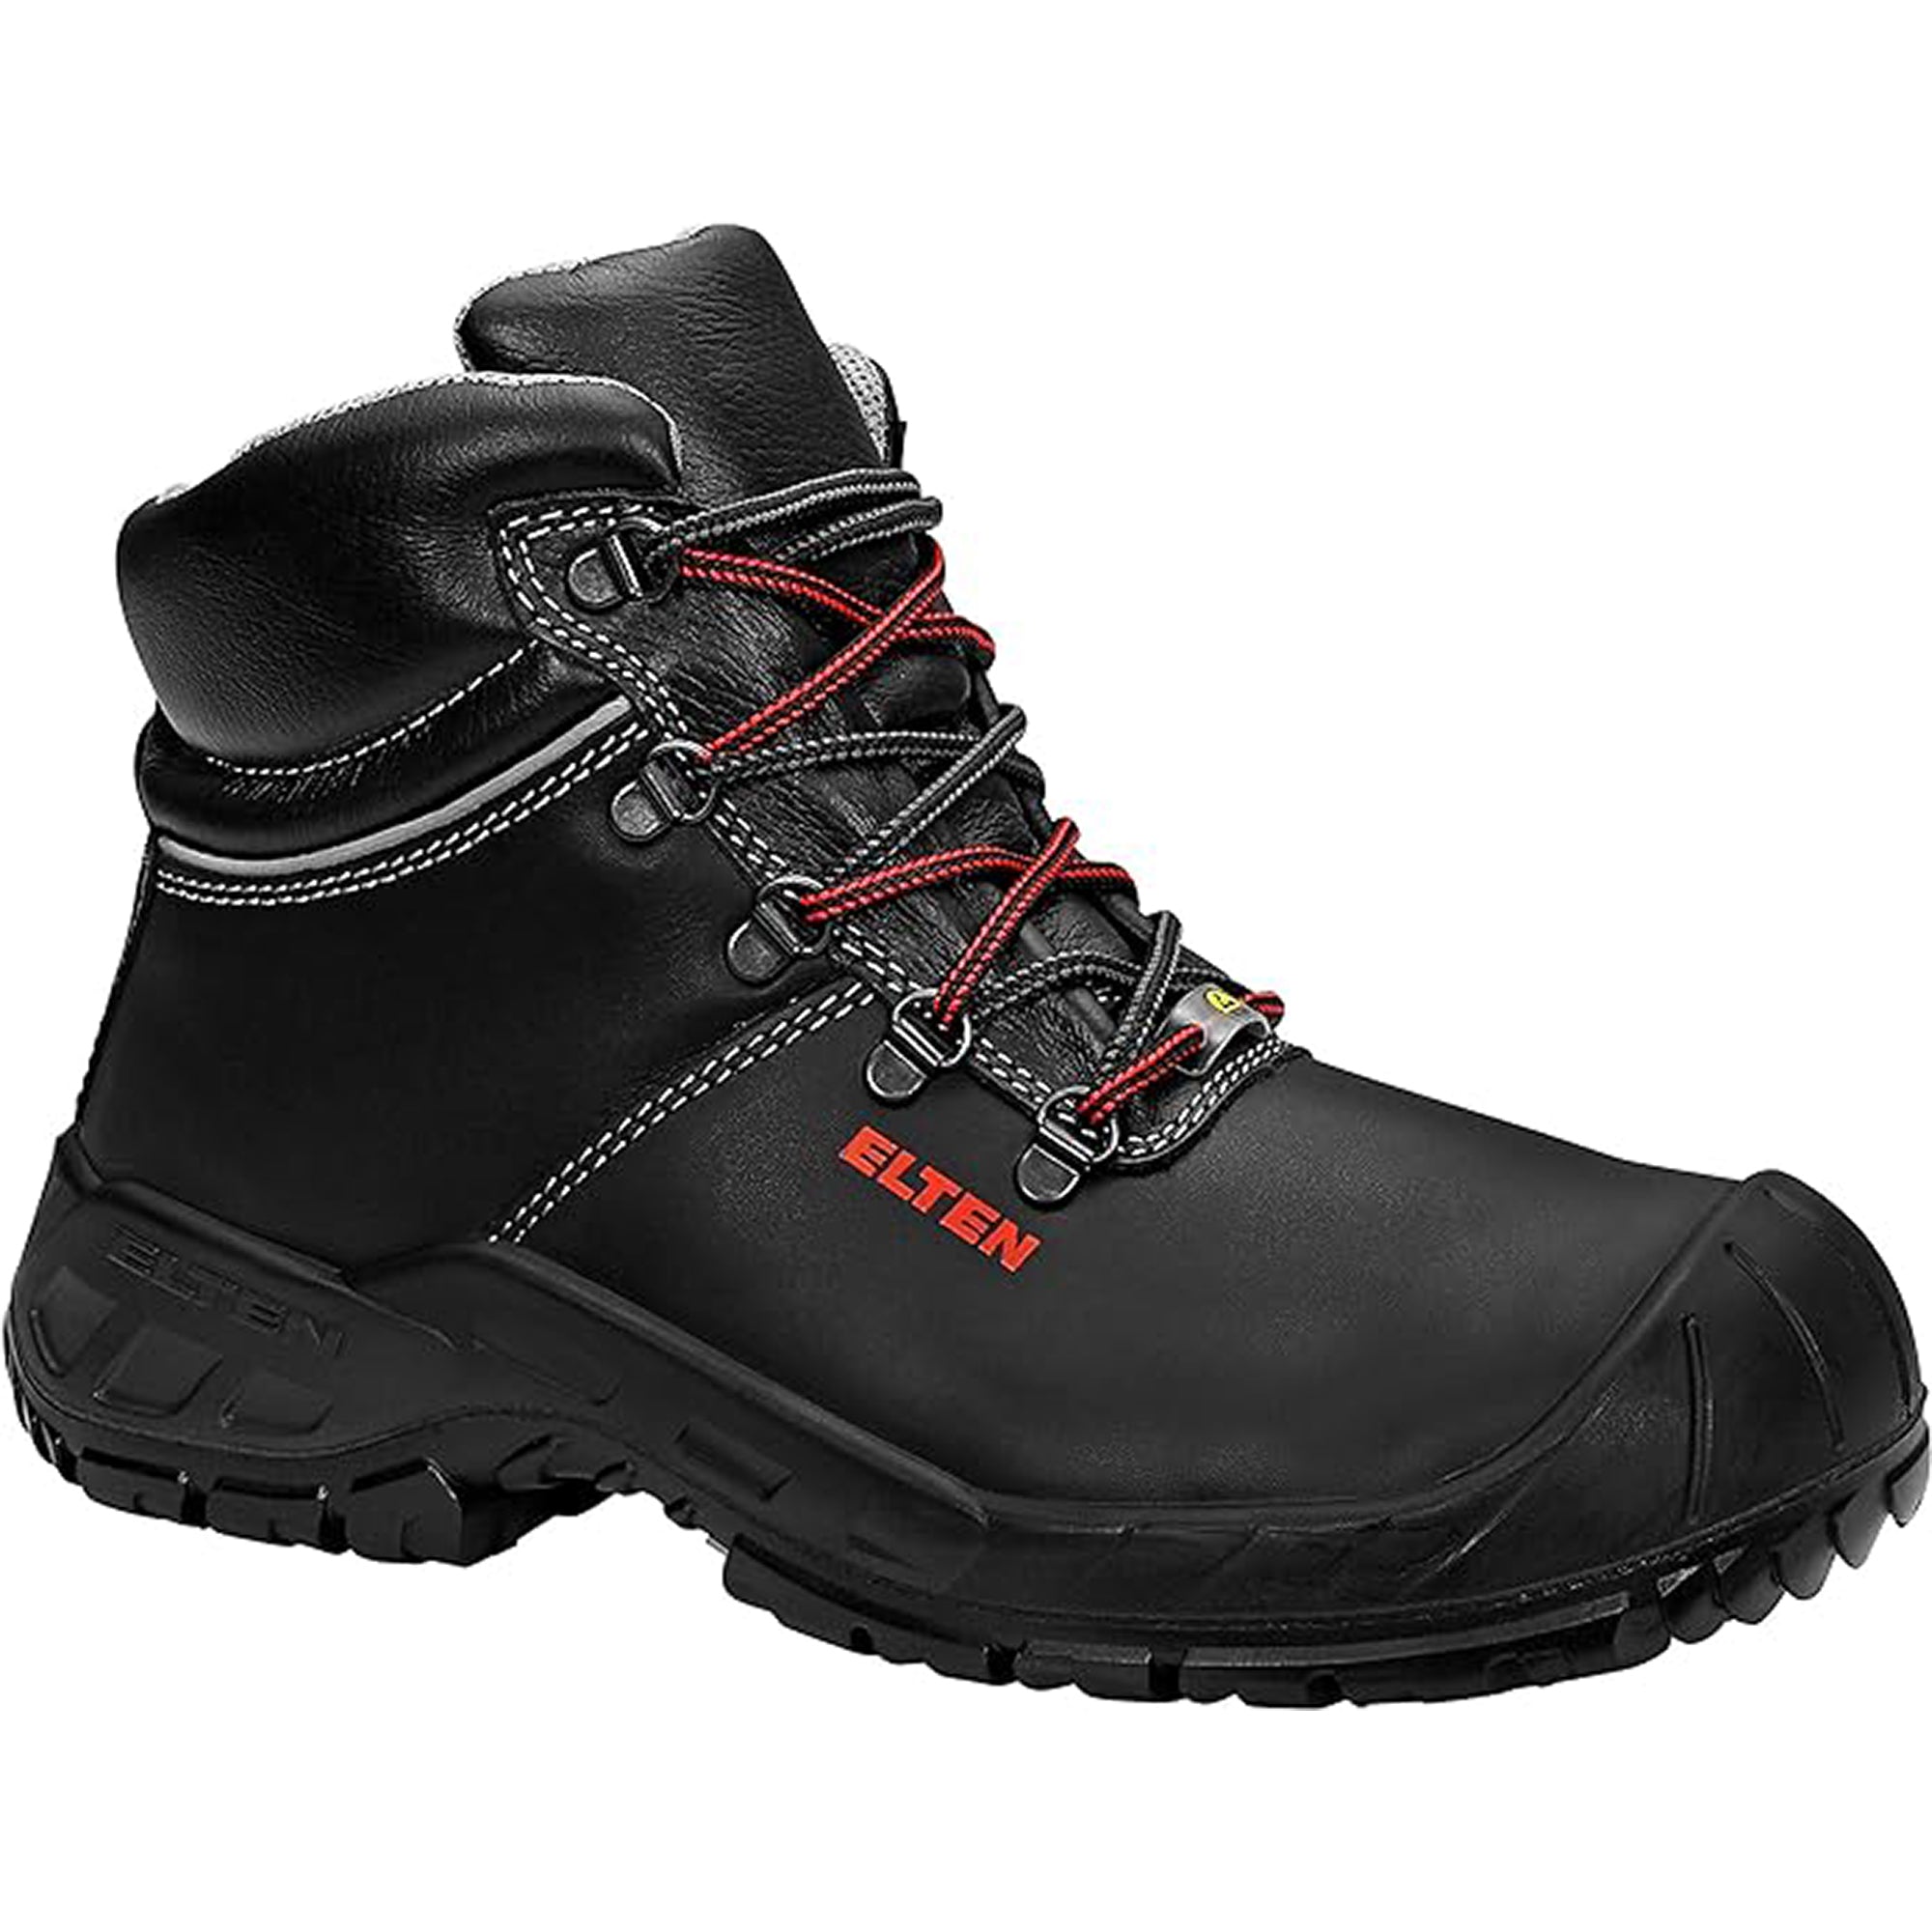 ELTEN RENZO Mid ESD S3 Safety work boots shoes Grip Steel Toe Leather Black